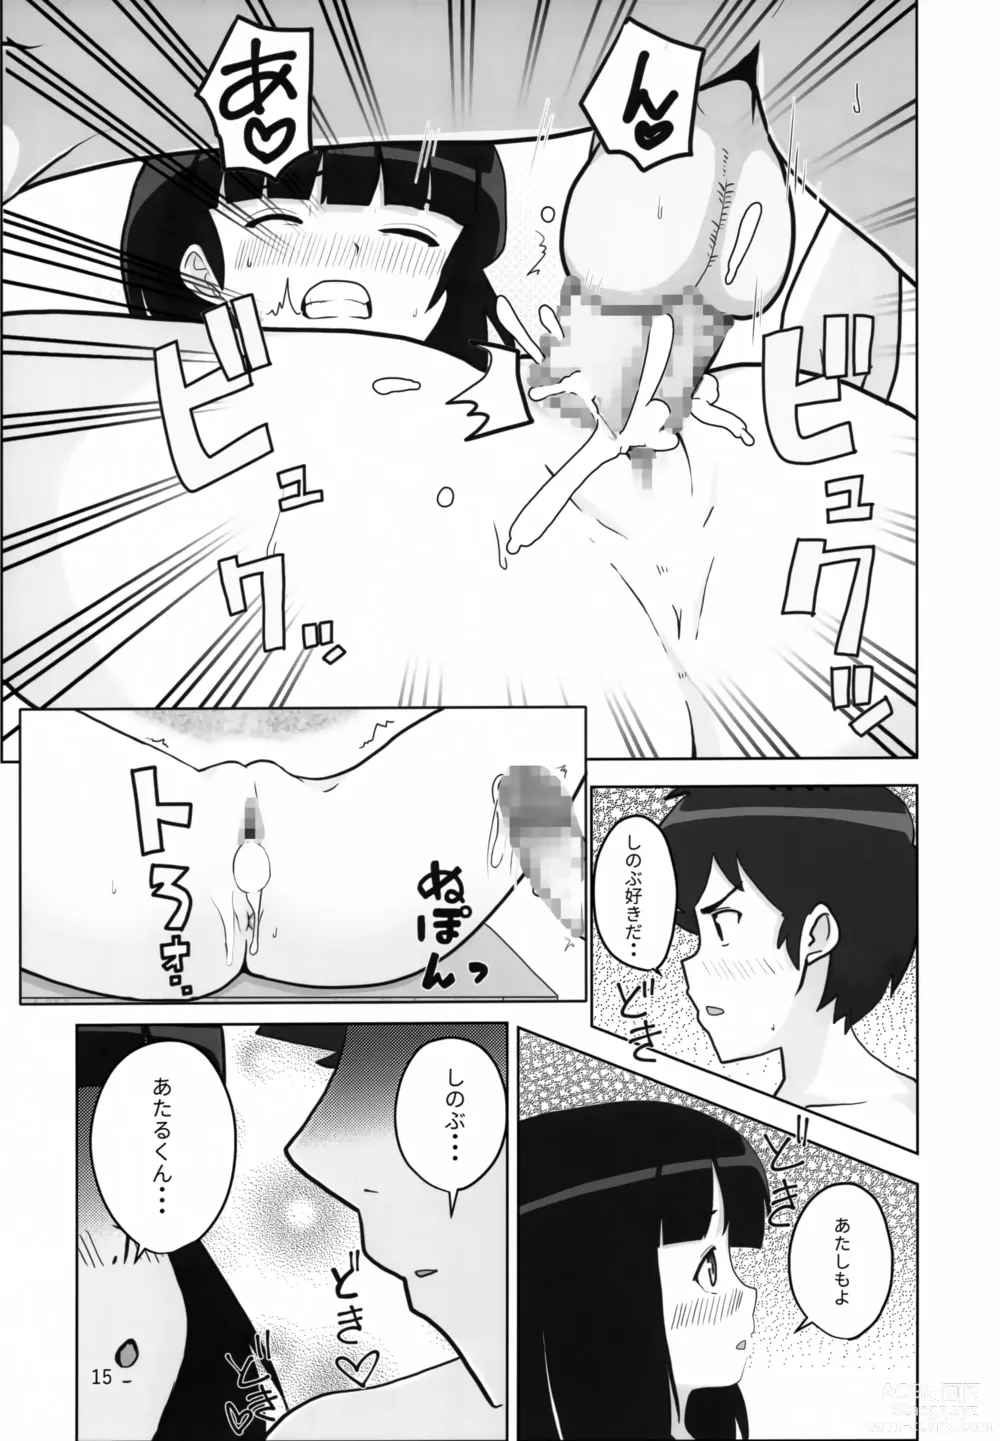 Page 16 of doujinshi Dont fidget too much